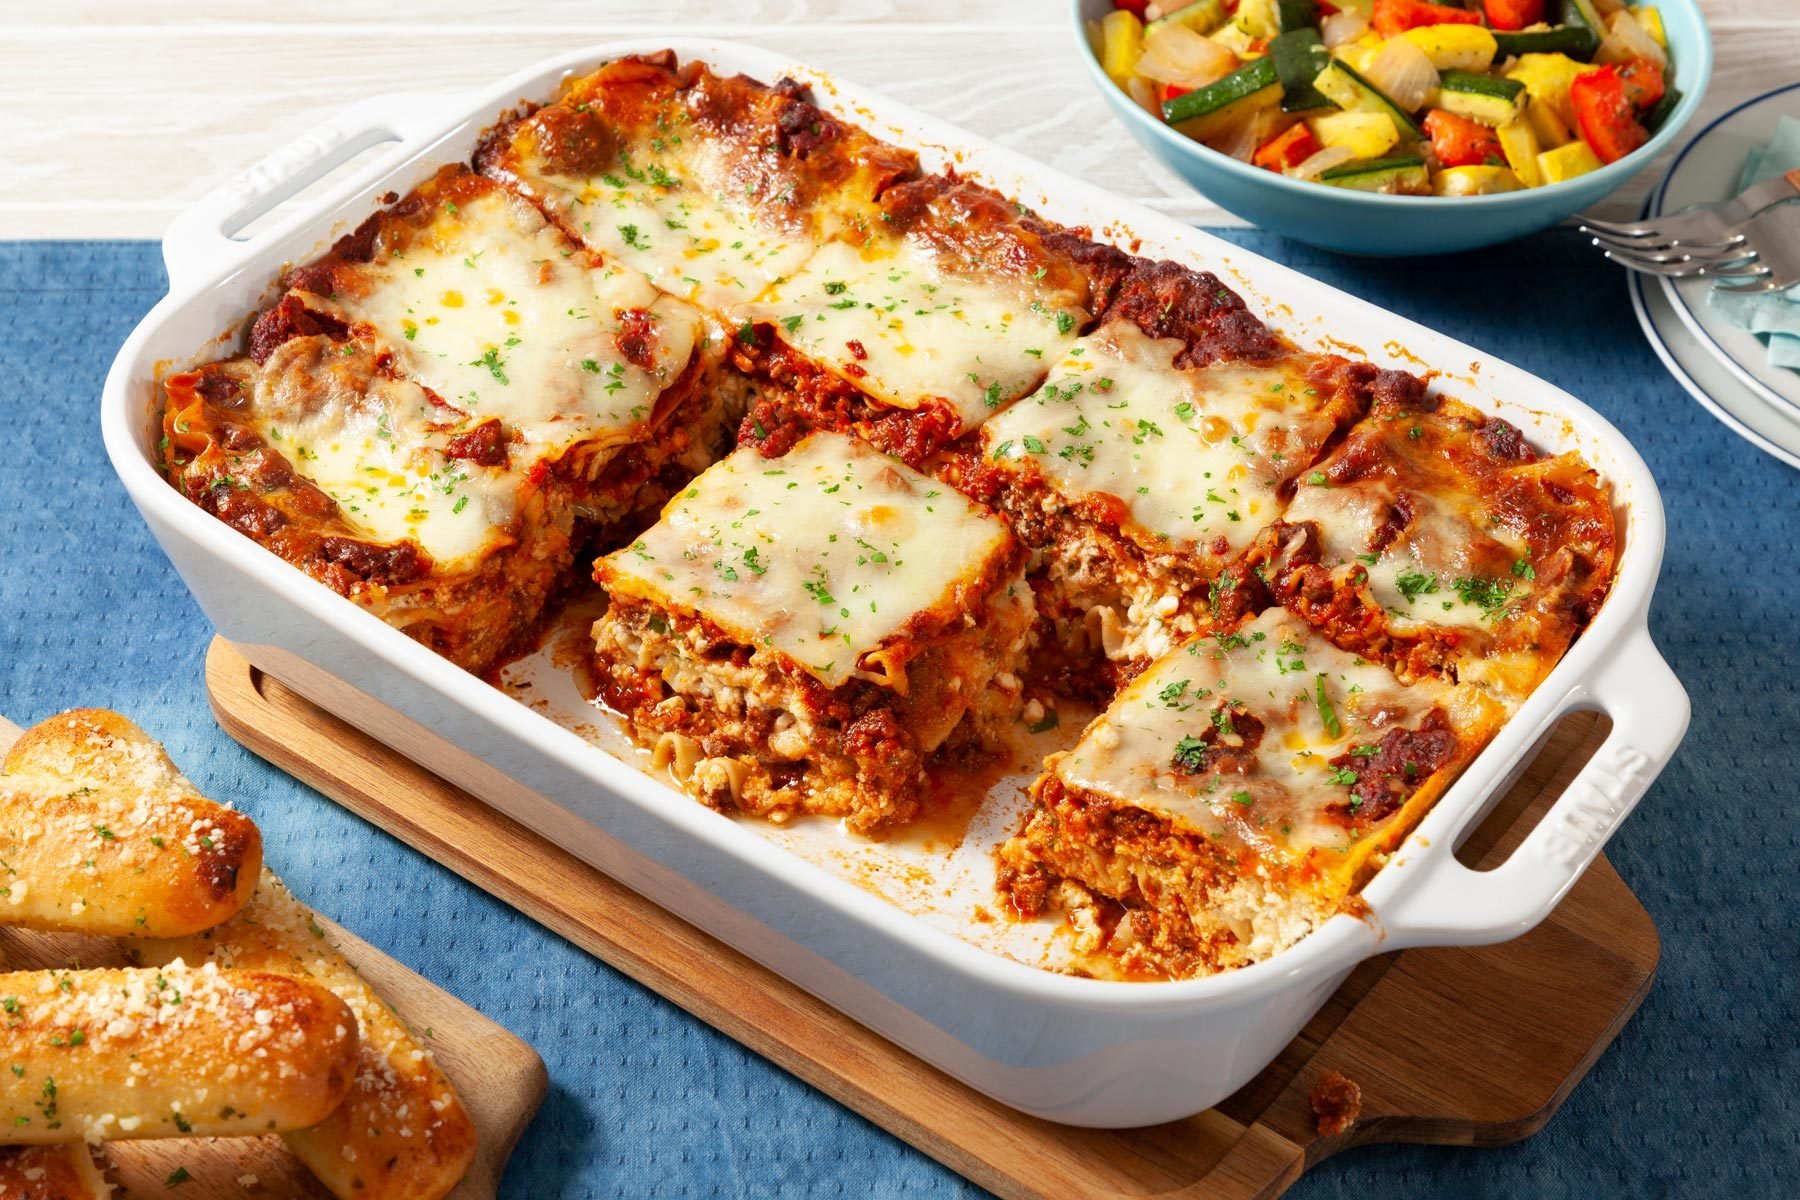 A Casserole Dish With Lasagna and a Bowl of Vegetables